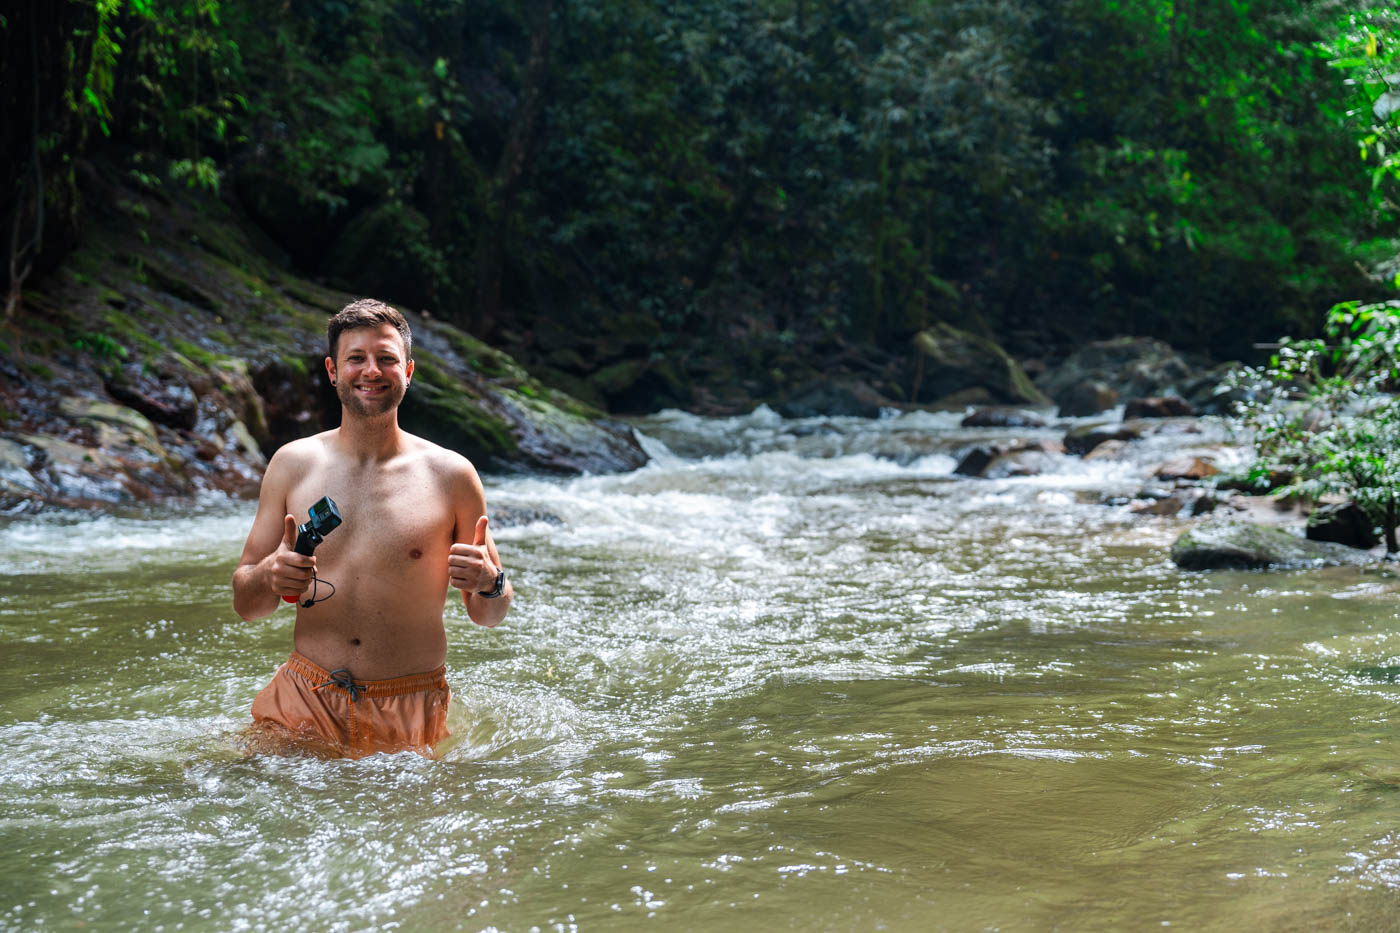 Ryan in orange swimmers and holding a GoPro standing waist deep in a river in Minca in the jungle.